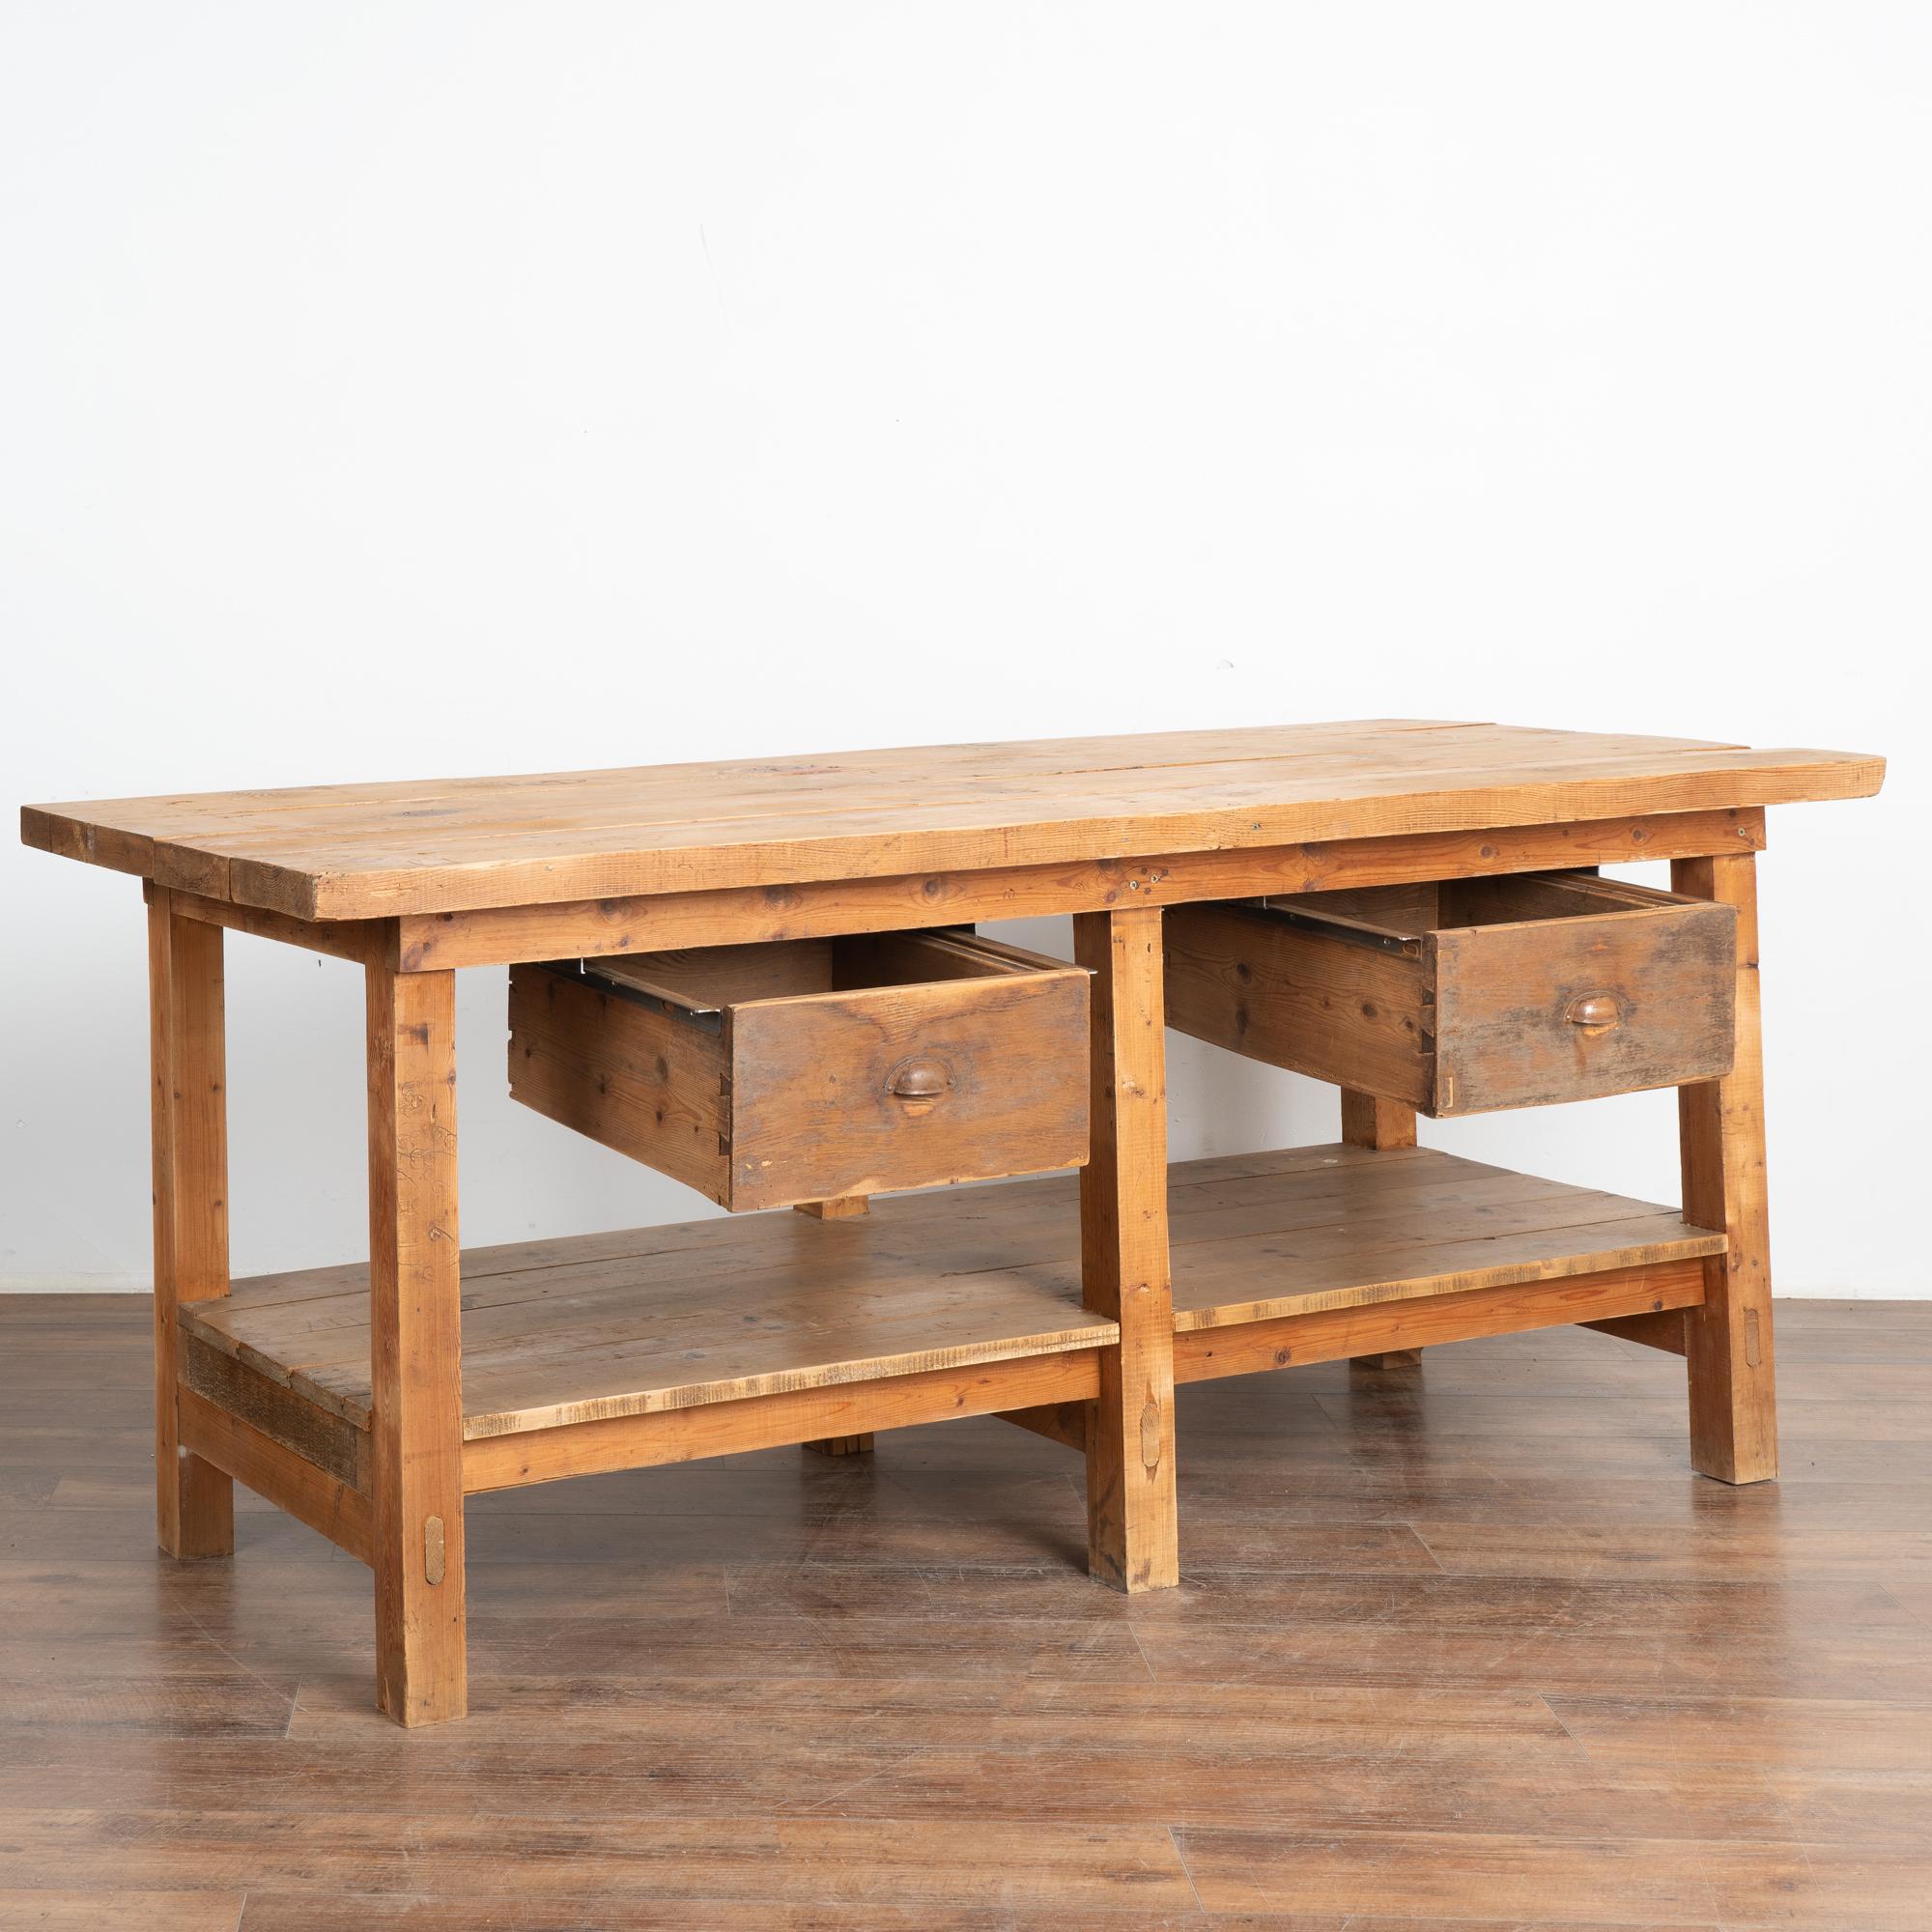 Hungarian Rustic Work Table With Two Drawers and Shelf, Kitchen Island circa 1920